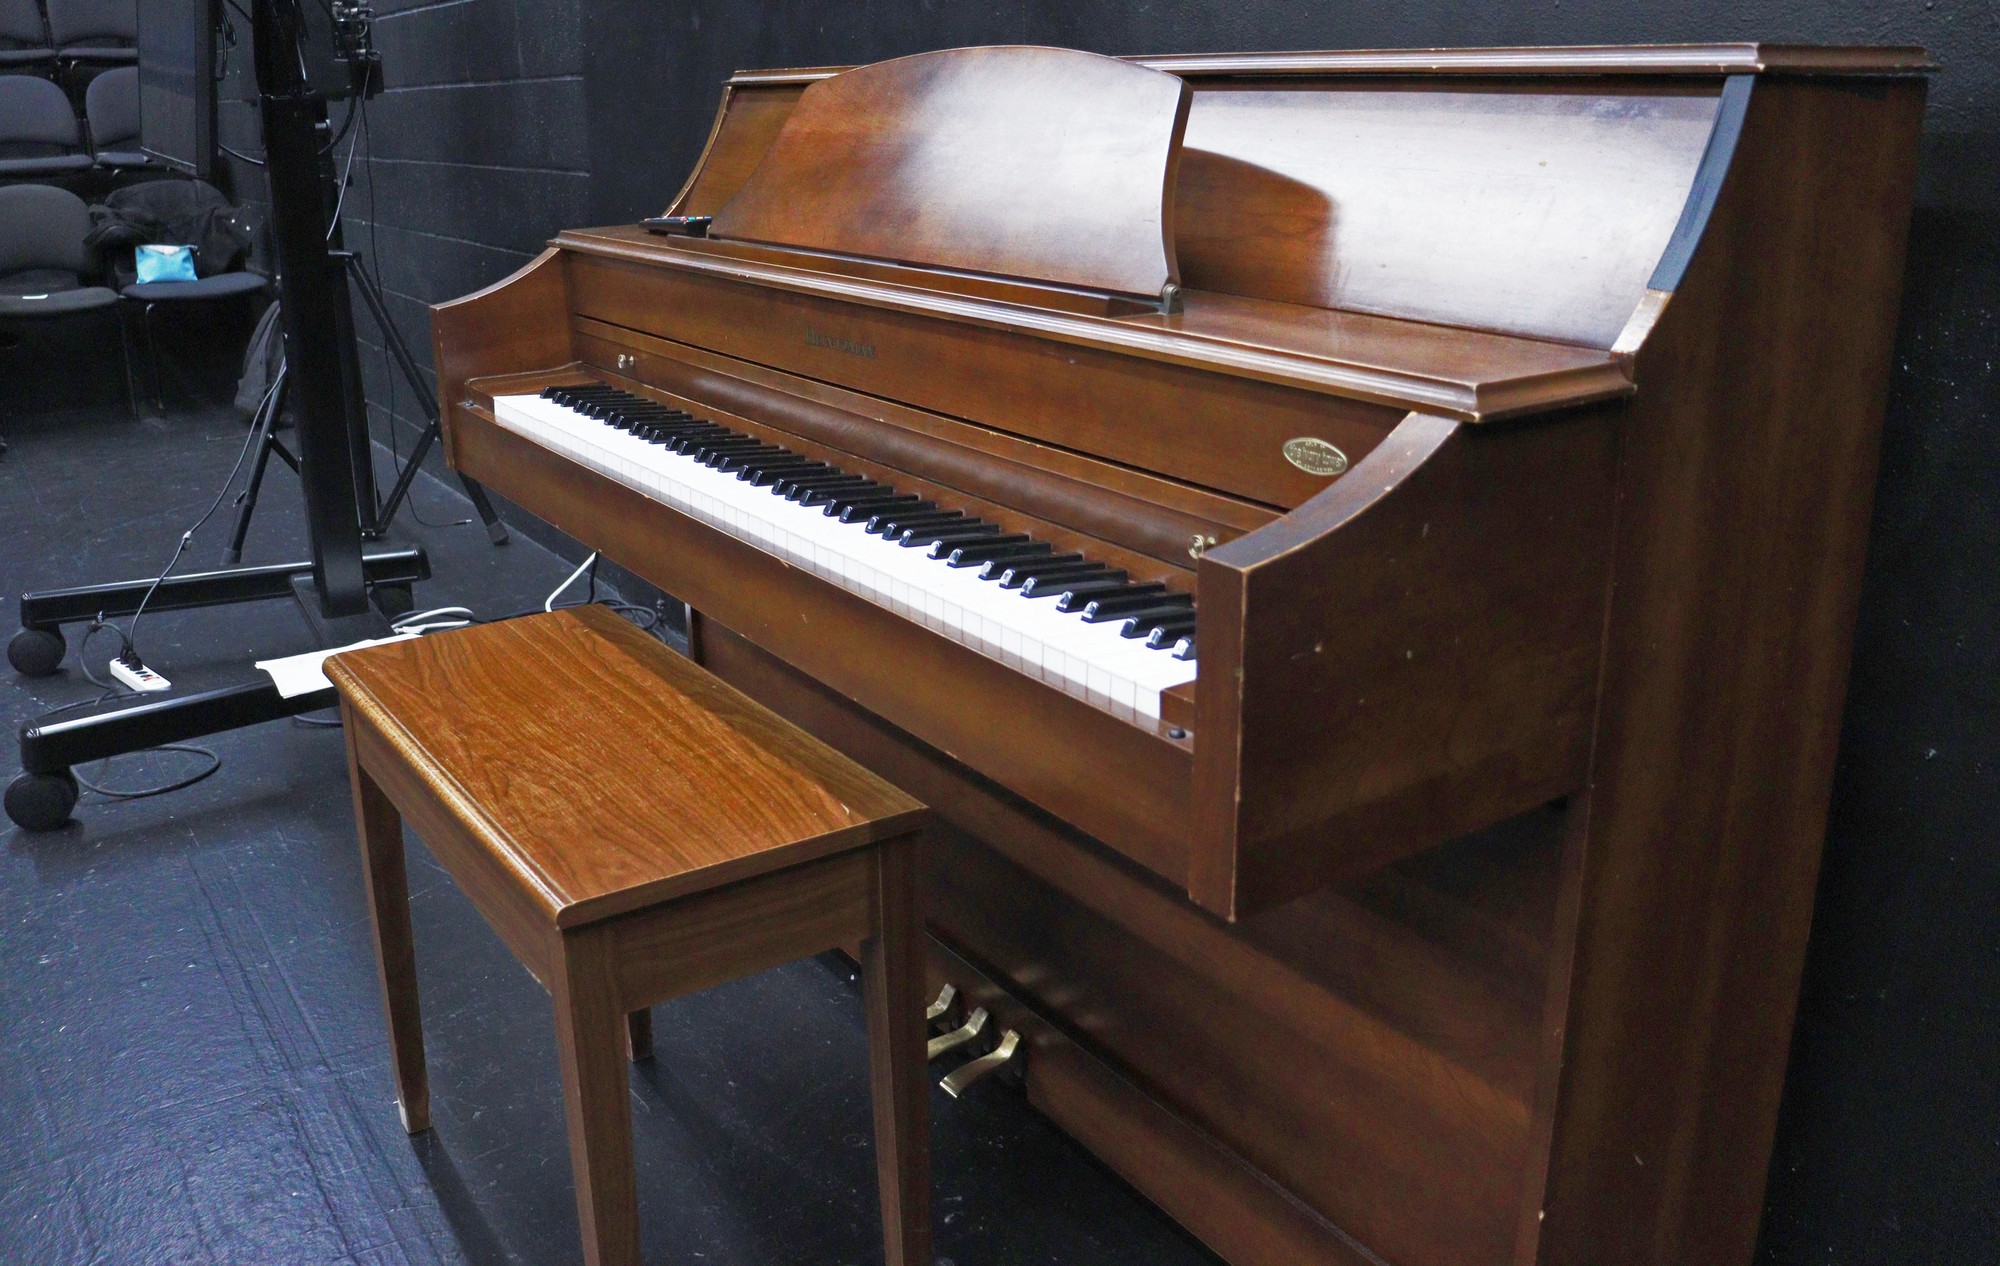 Algonquin's Woodroffe campus features a wide range of pianos.